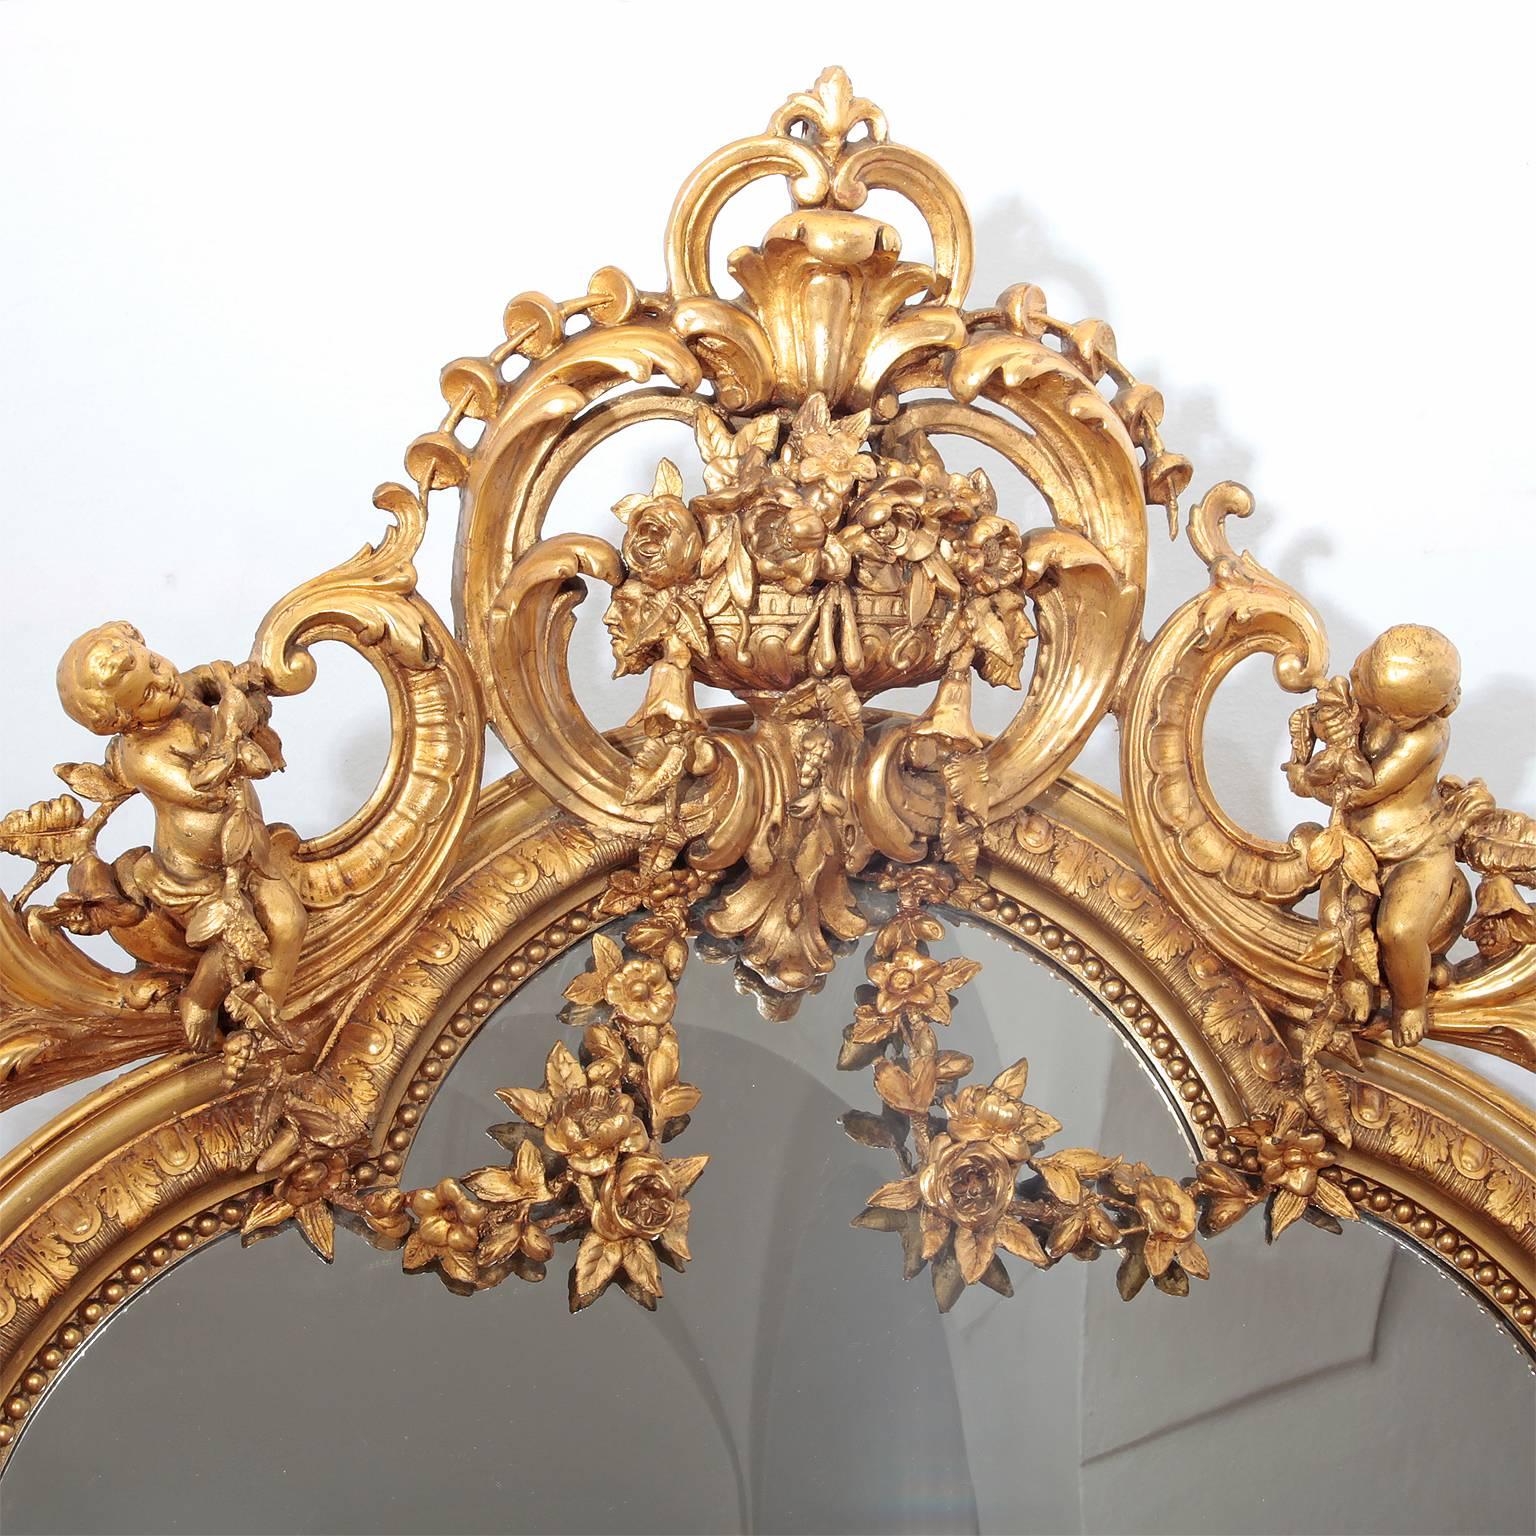 Large Mirror of the Napoleon III period. The gilded frame is decorated with classical friezes and has a very elaborately designed headpiece with c-shaped rocailles, festoons and cherubs surrounding an amphora.